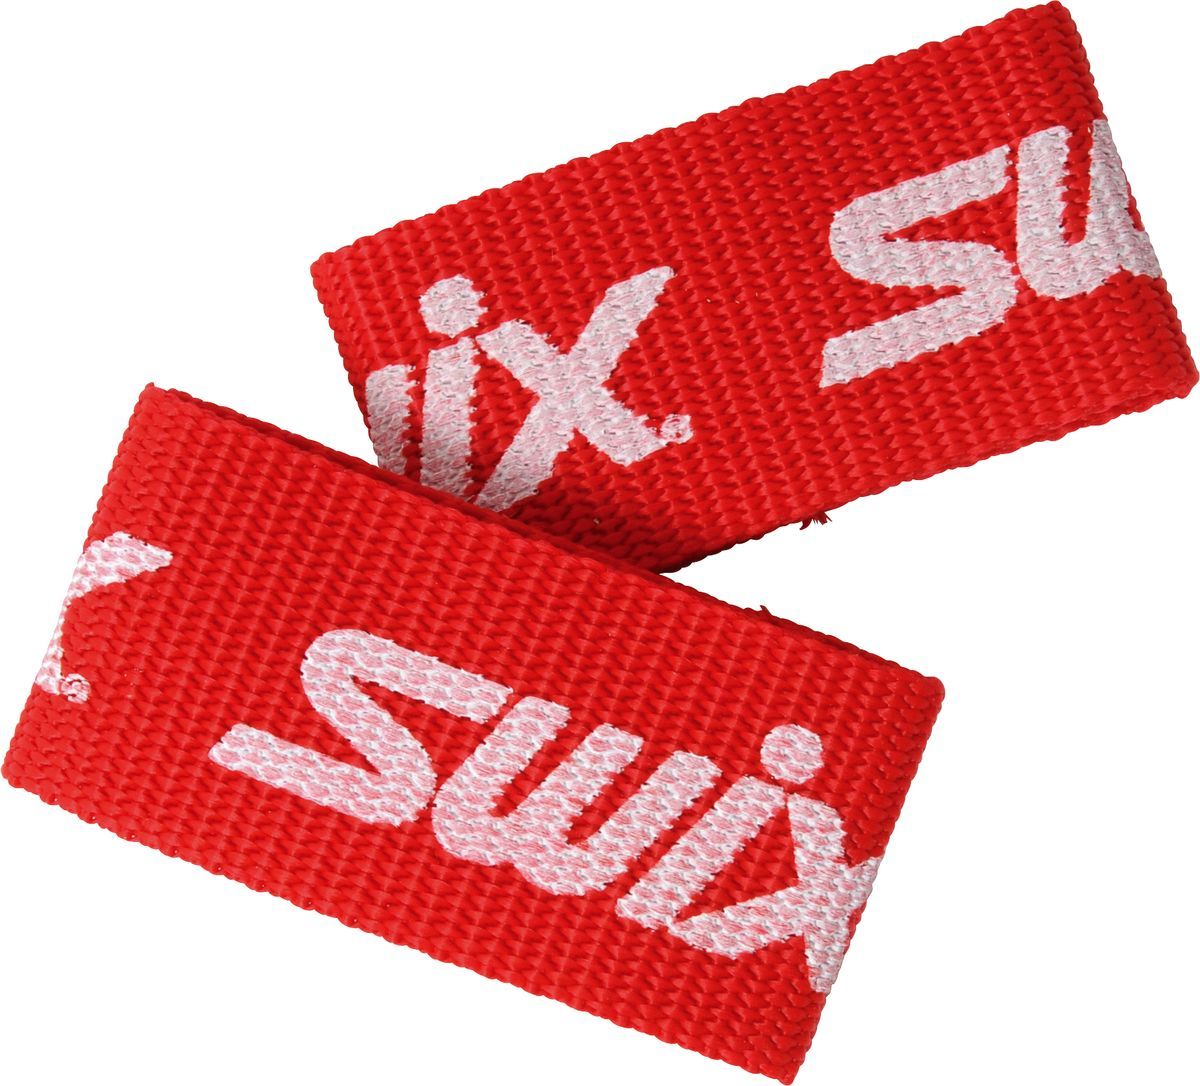 SIMPLE SKI STRAPS FOR XC RACING (PAIR)   RED O/S  